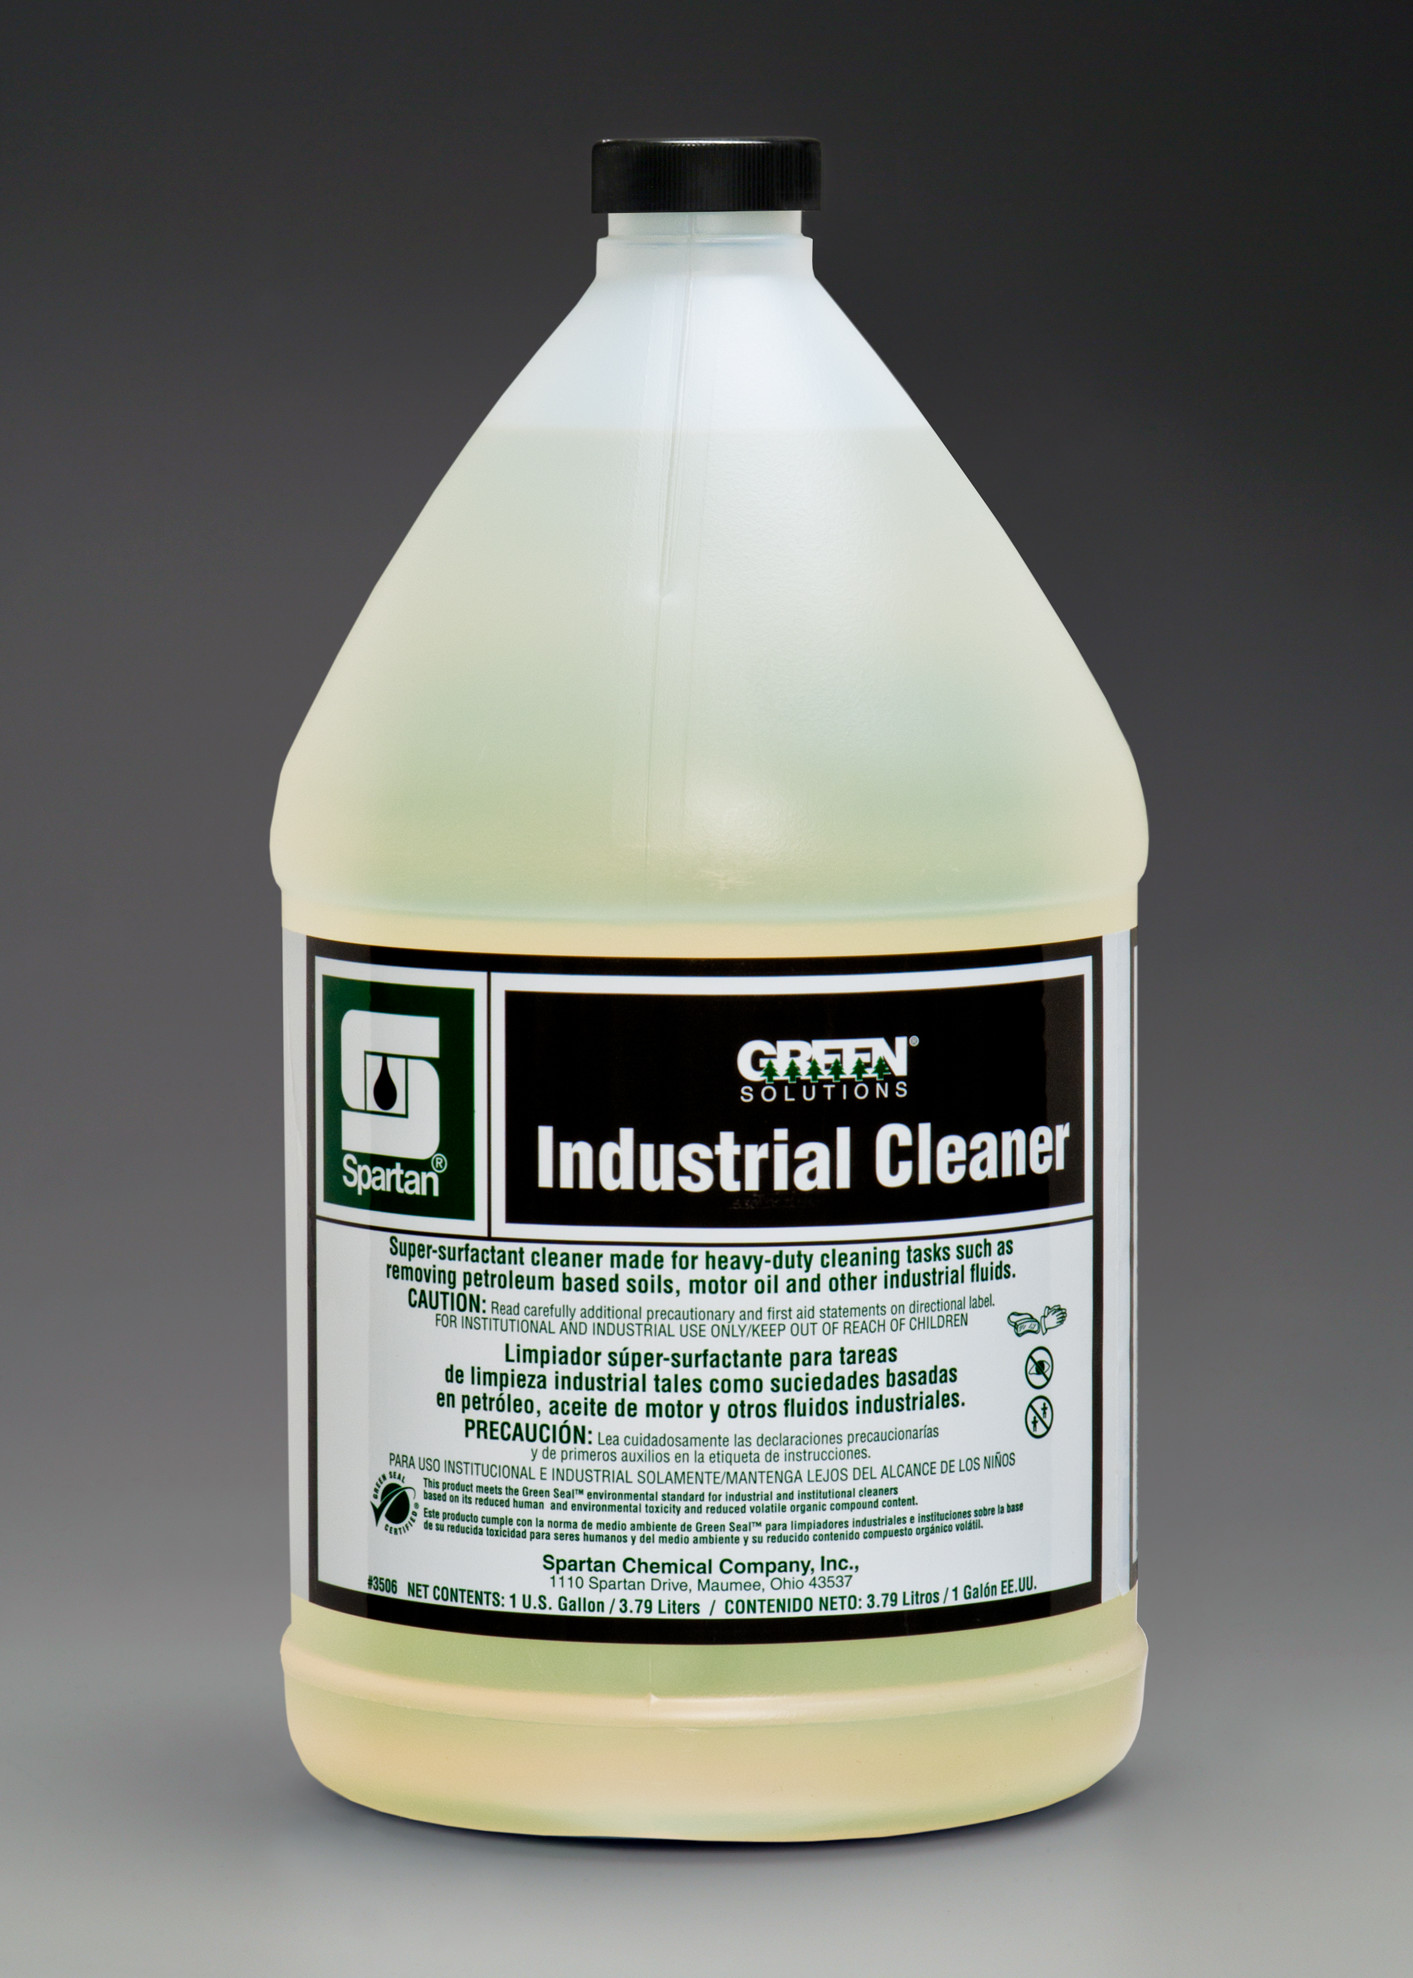 Spartan Chemical Company Green Solutions Industrial Cleaner, 1 Gallon Jug